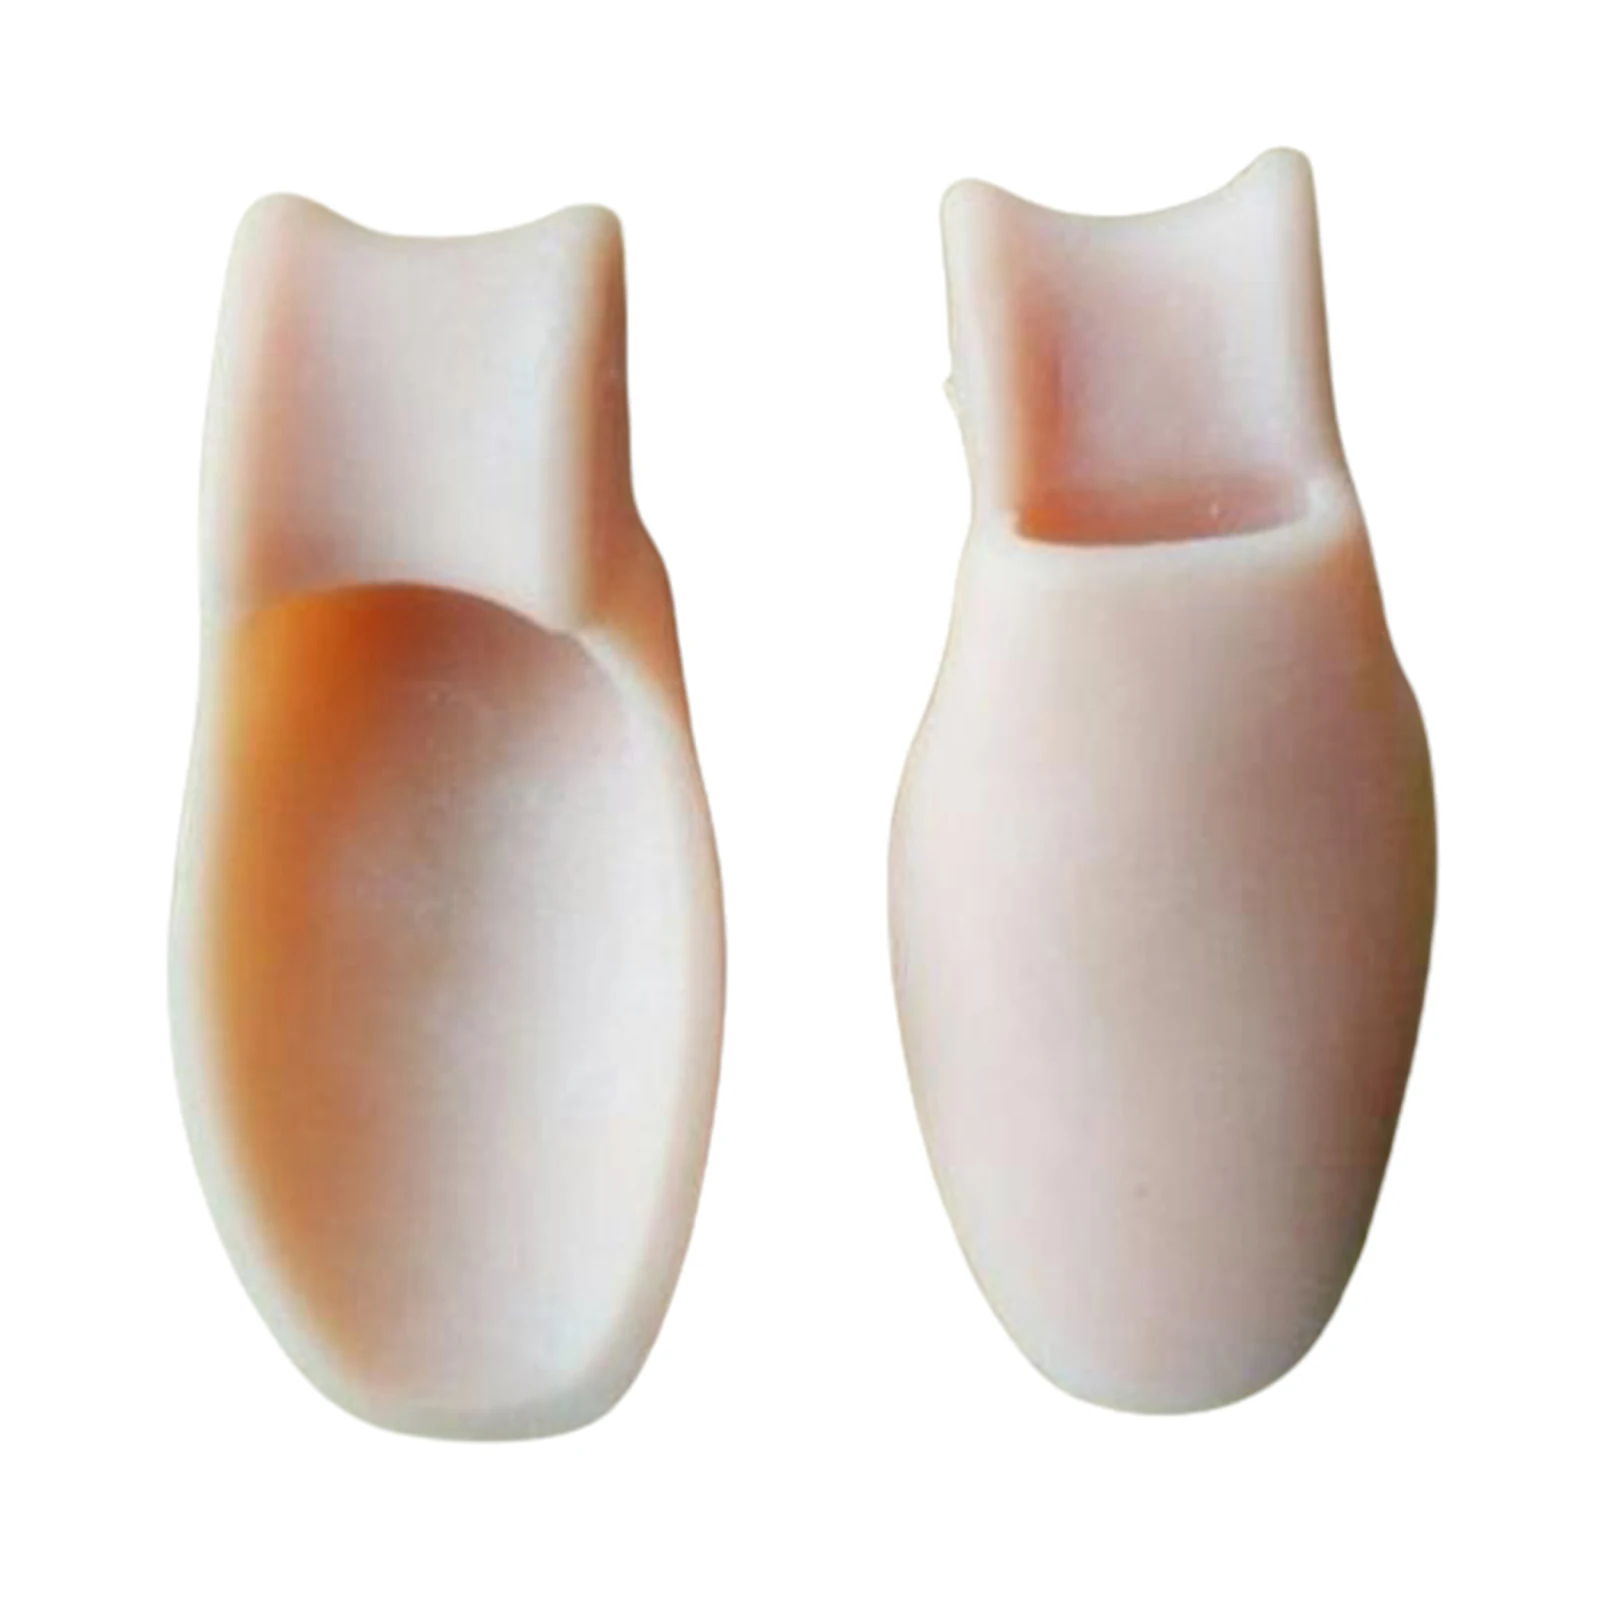 2Pcs Gel Toe Separators Toe Spreader Spacer For Overlapping Toes Bunion Pain